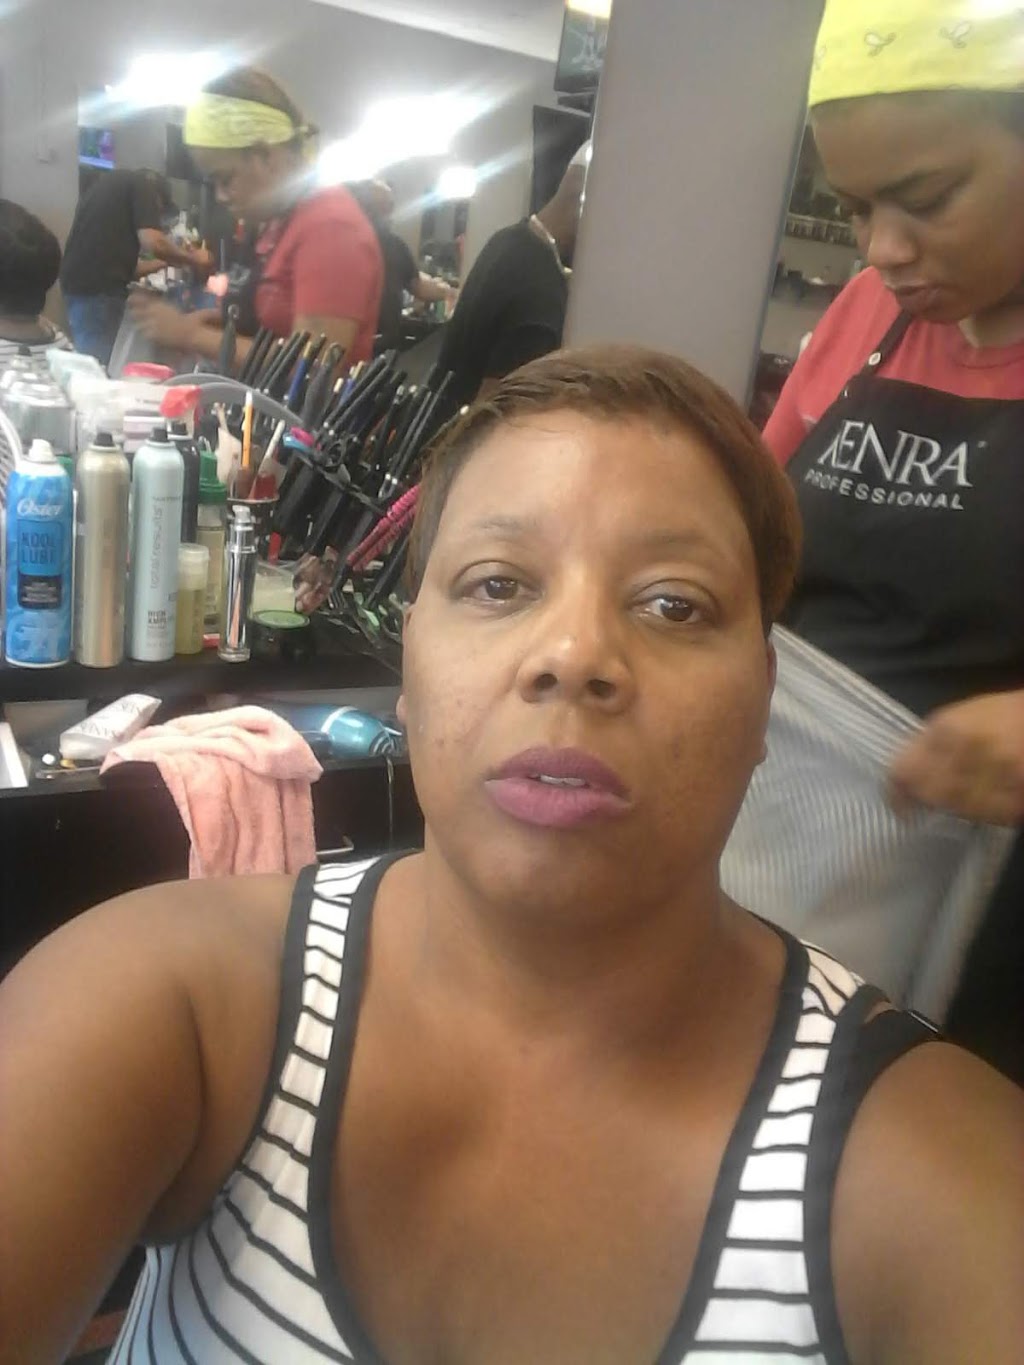 Klippers Barber Salon - hair care  | Photo 2 of 3 | Address: 9008 Overland Plaza, St. Louis, MO 63114, USA | Phone: (314) 801-8616